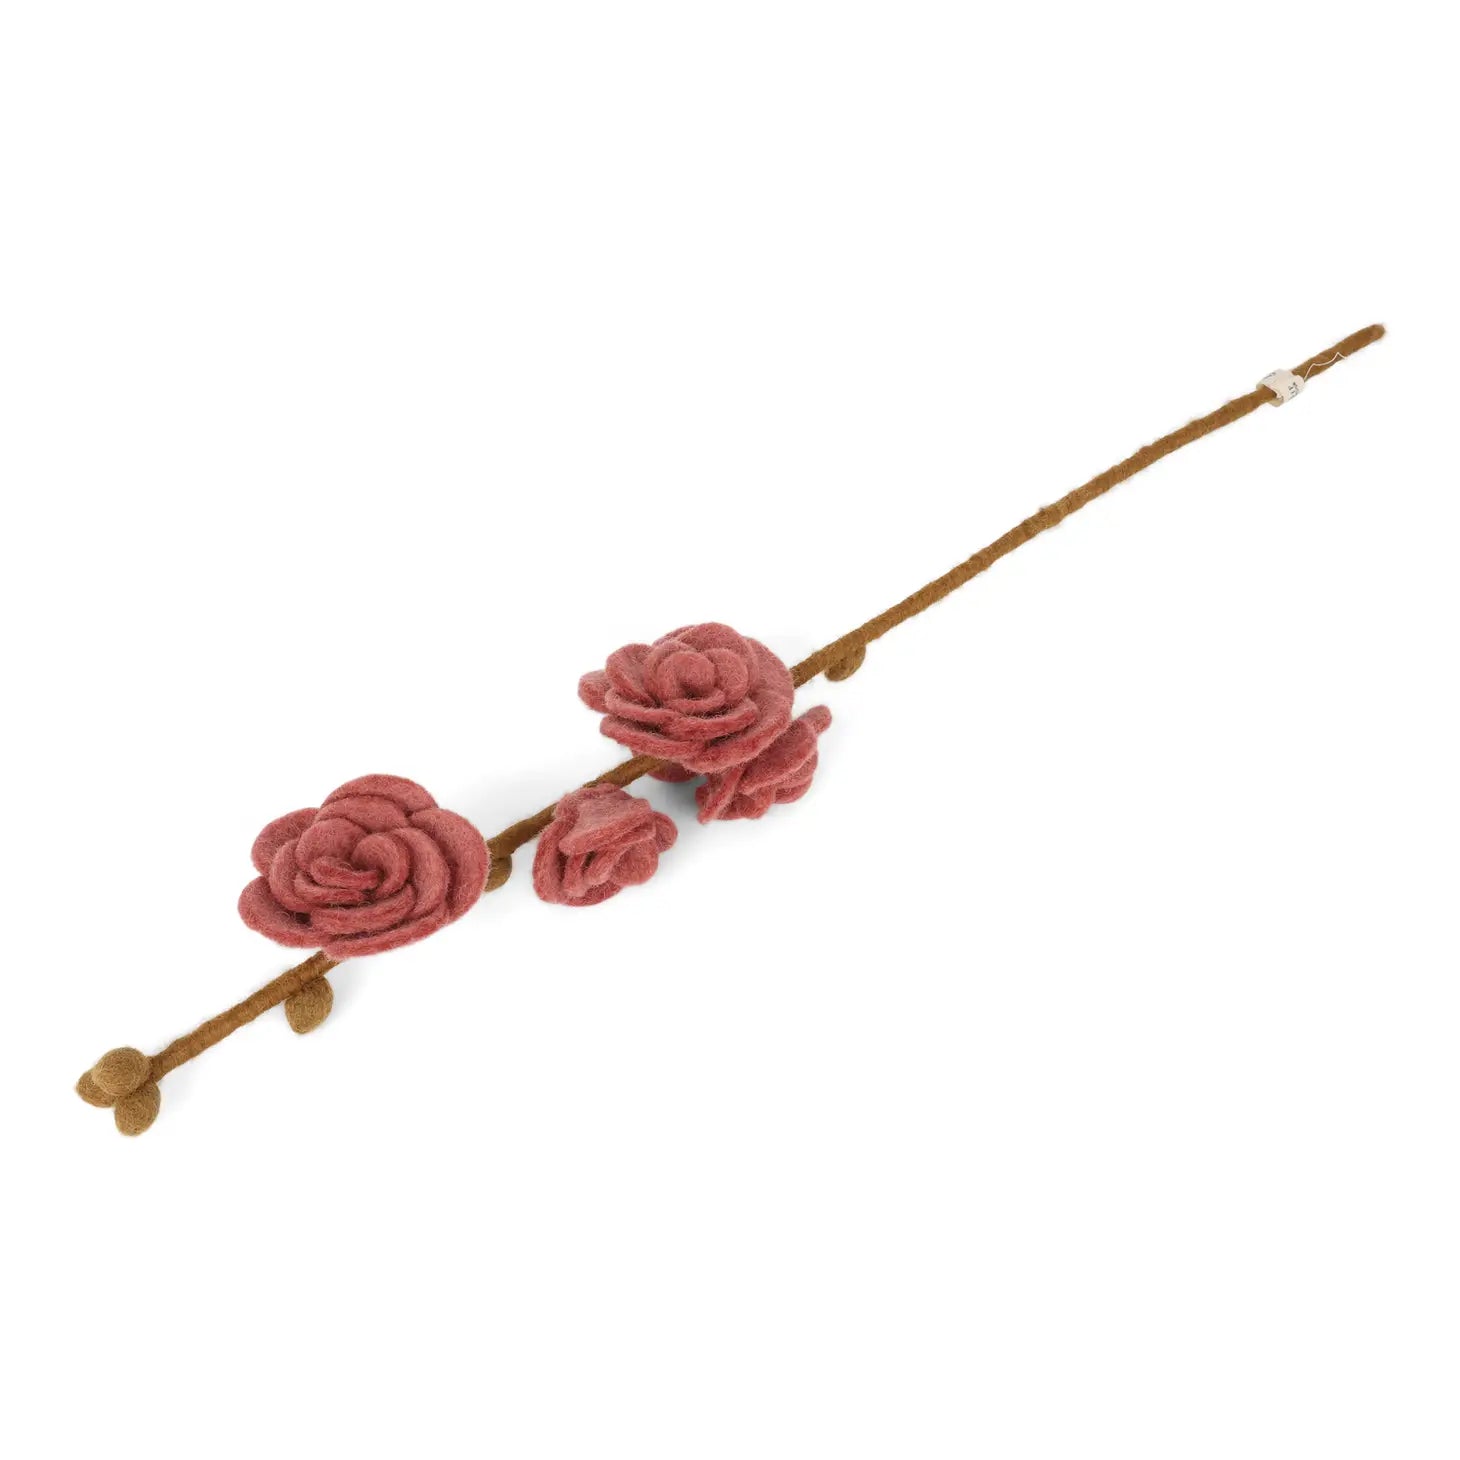 Felt Branch with Roses